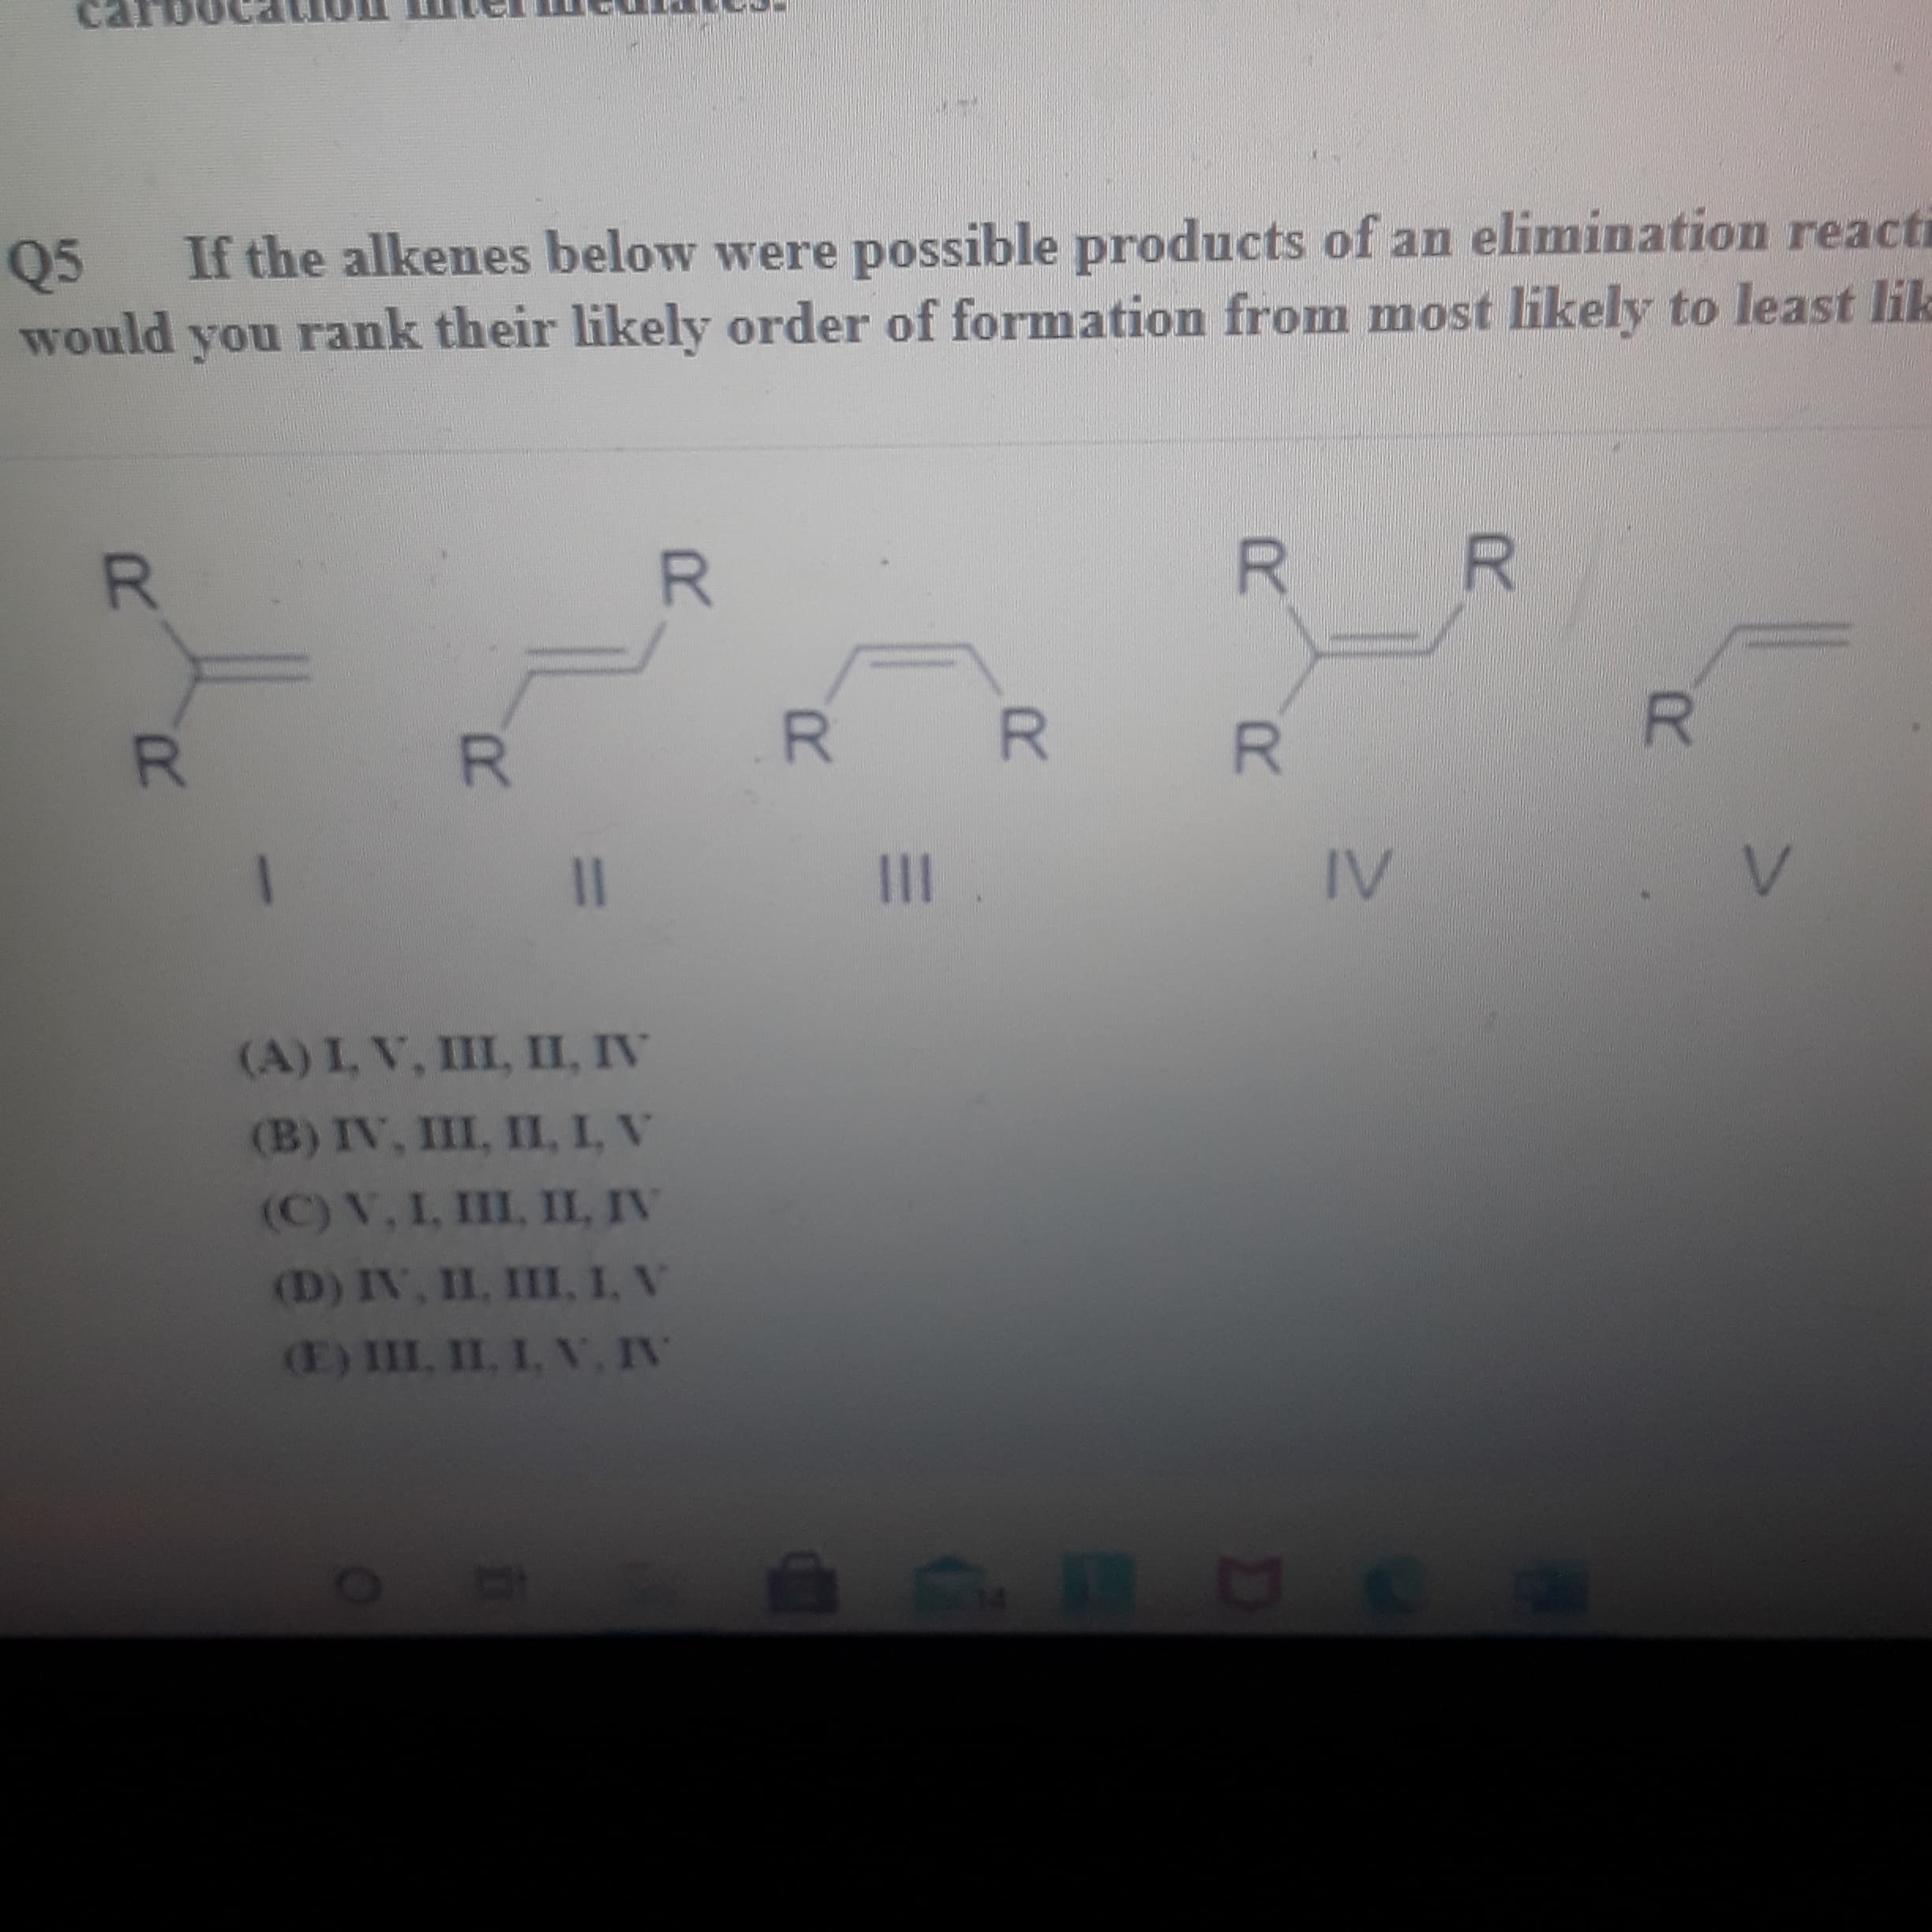 Q5
If the alkenes below were possible products of an elimination react
would you rank their likely order of formation from most likely to least li
R.
R]
R.
R.
R.
1|
II
IV
(A) I, V, III, II, IV
(B) IV, III, II, I, V
(C) V, L, III, IIL, IV
(D) IV, II, III, I, V
E) III, II. I, V, IV
